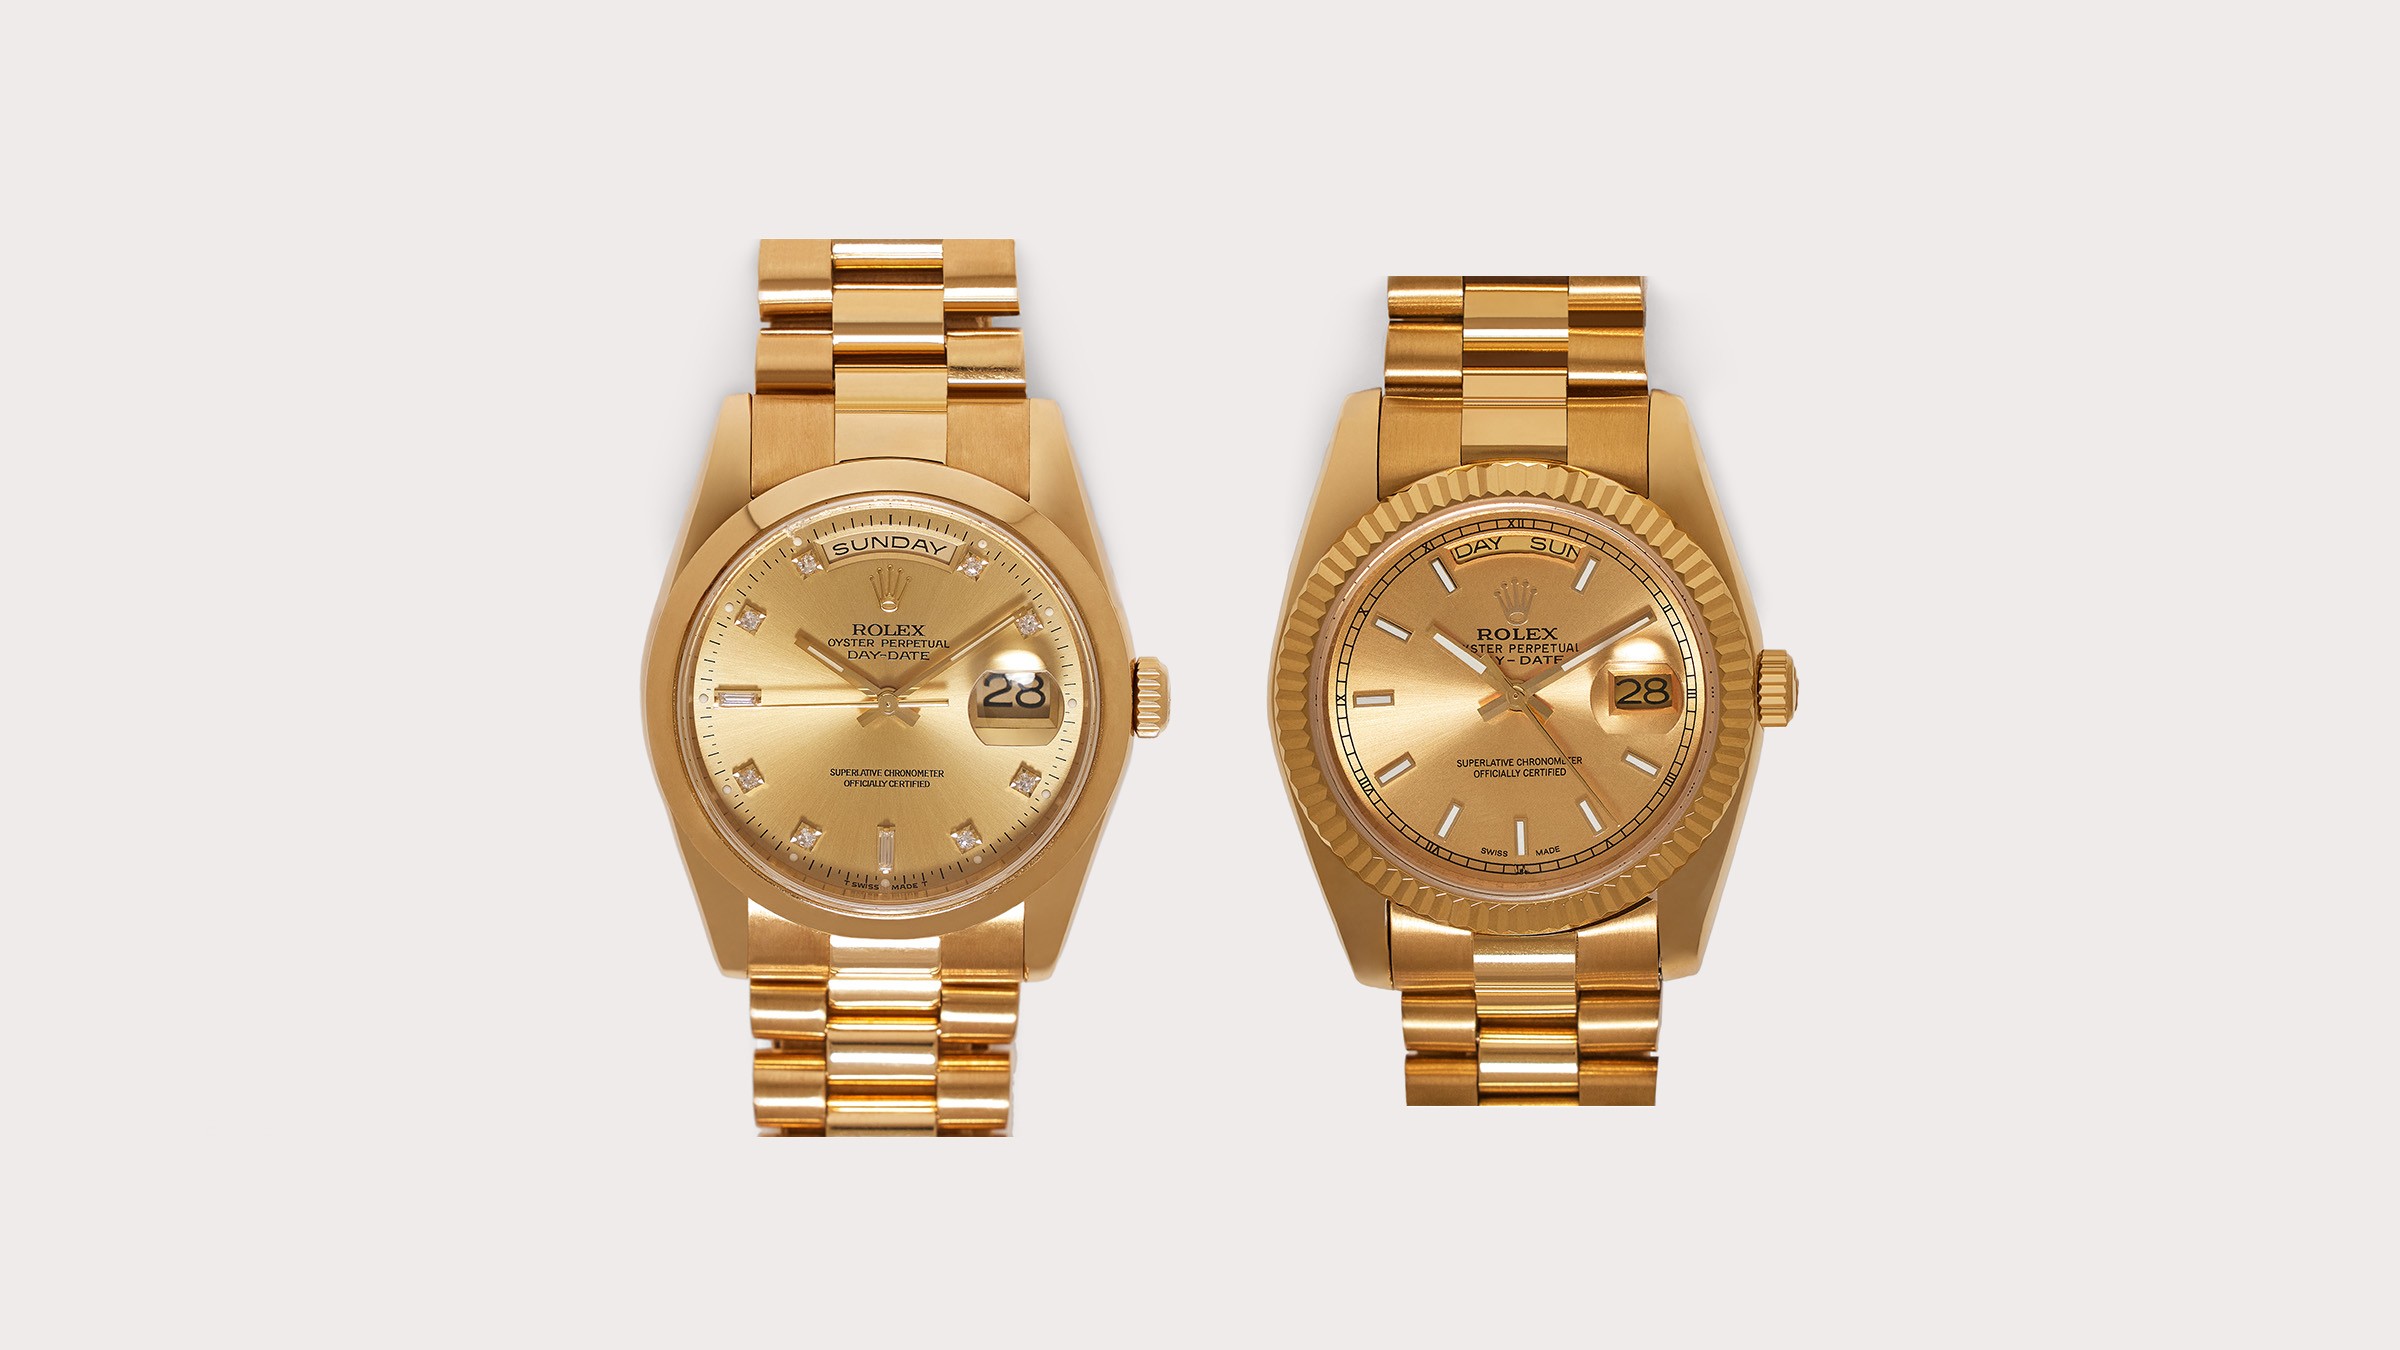 Duplikere rive ned cilia What Makes a Fake Rolex Day-Date, Fake? - Academy by FASHIONPHILE